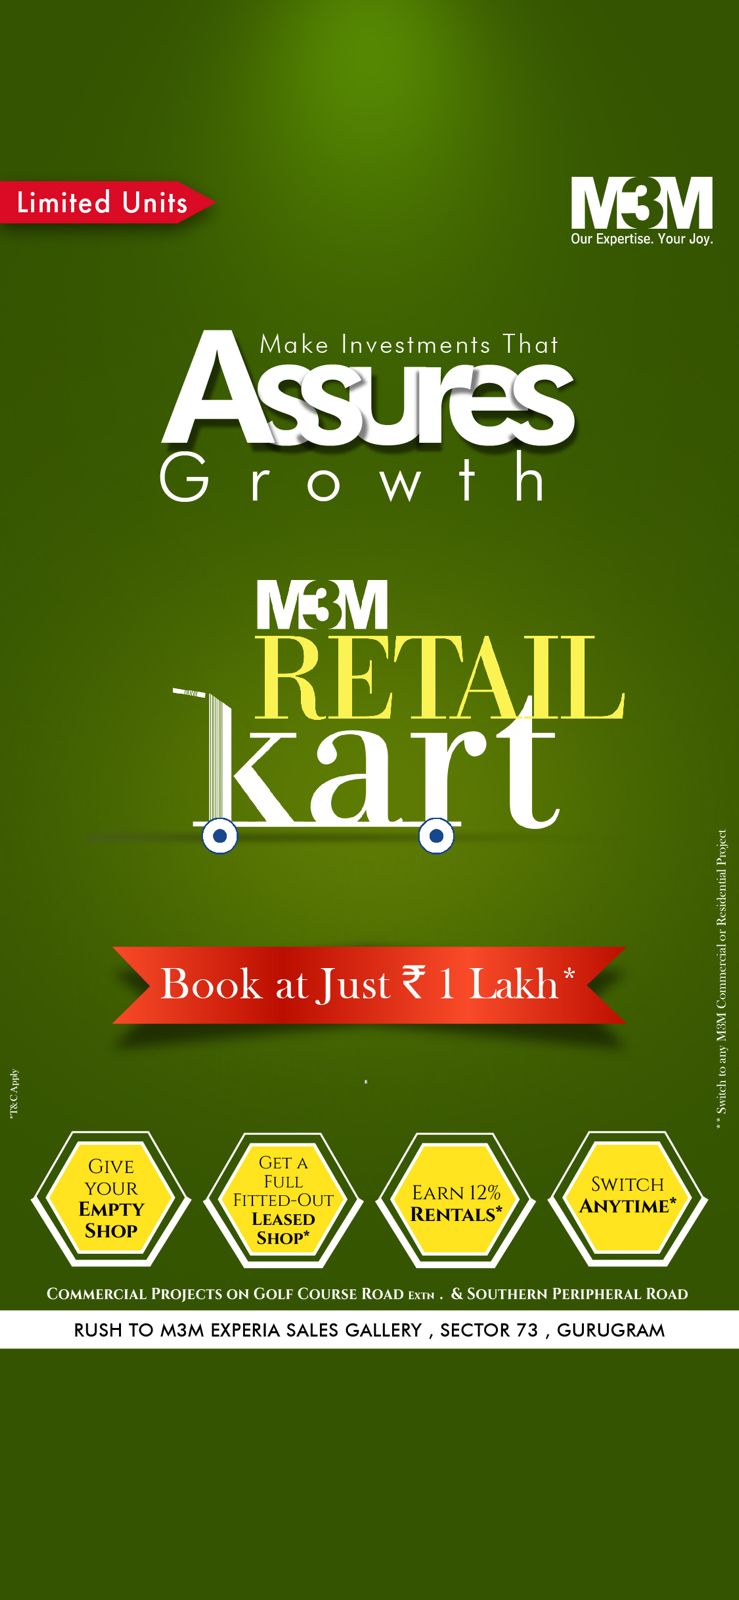 Make Investments that assures Growt at M3M Retail Kart Update